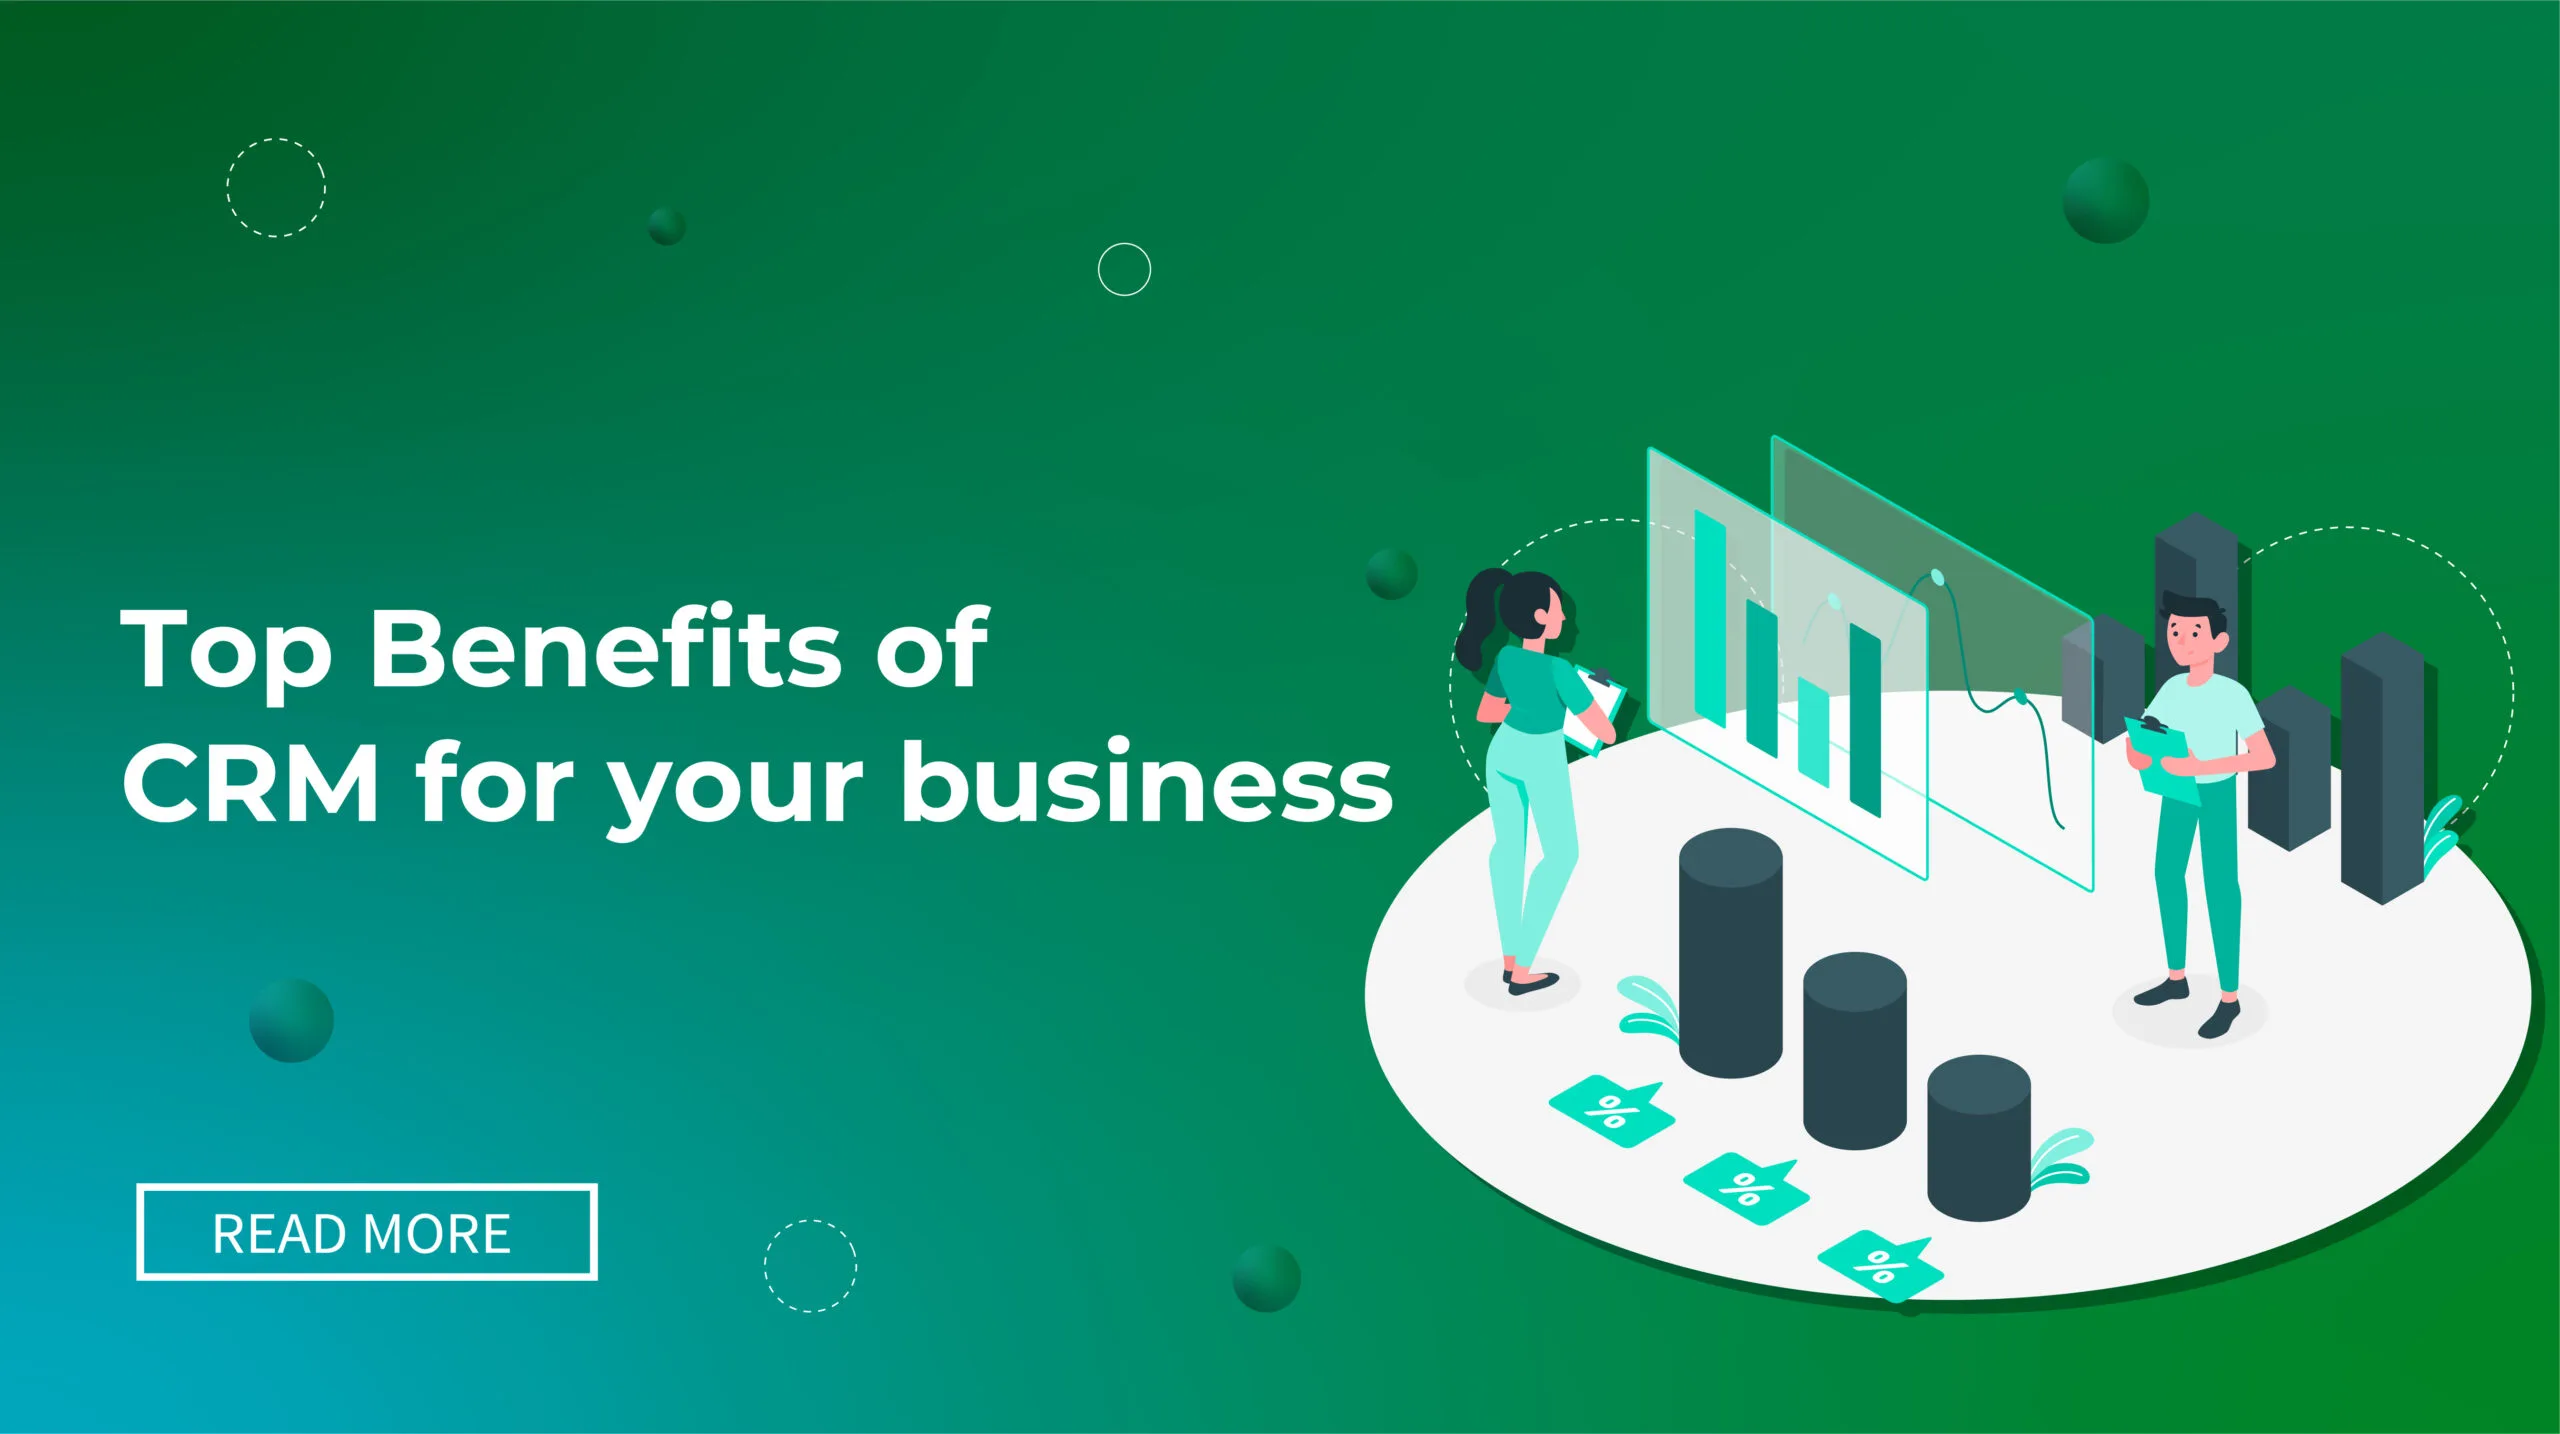 Top 5 Multifaceted Benefits of CRM for Your Business